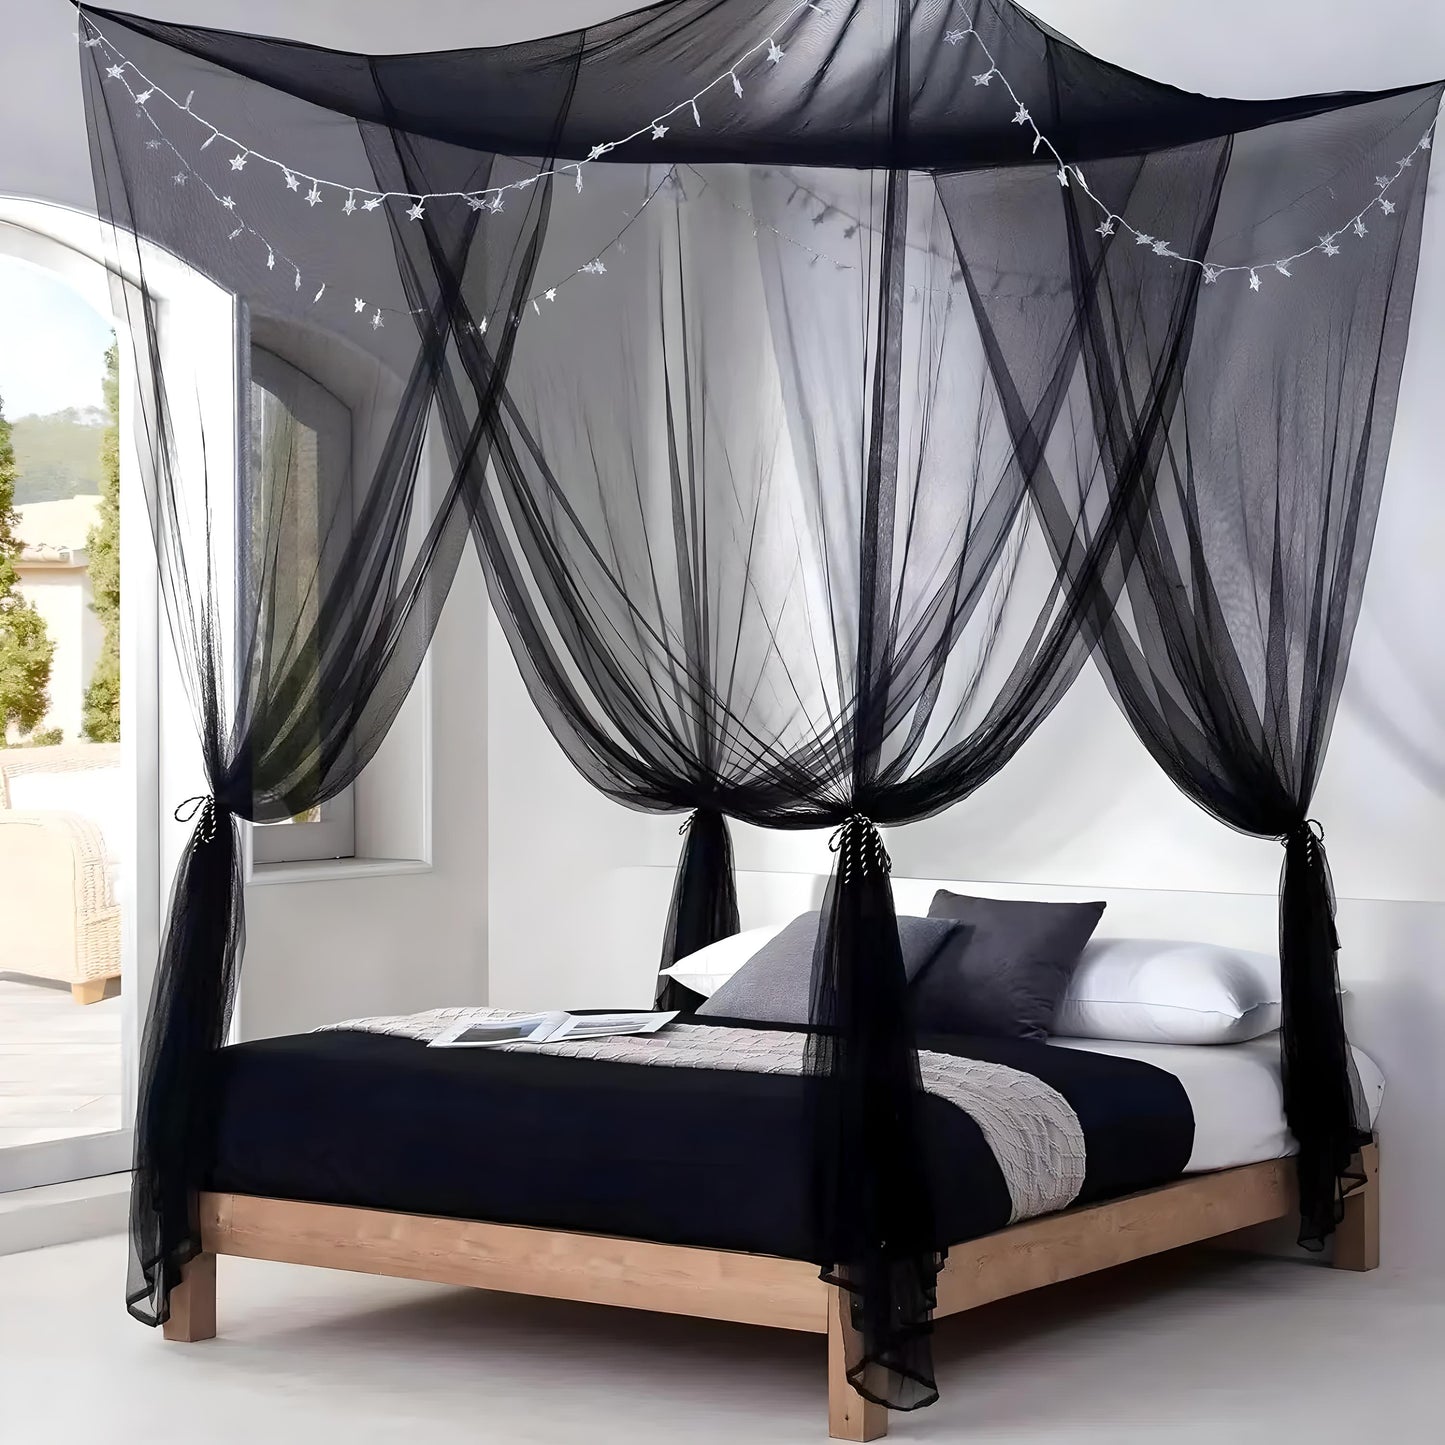 Multifunctional Mesh Mosquito Net for Bedroom and Home